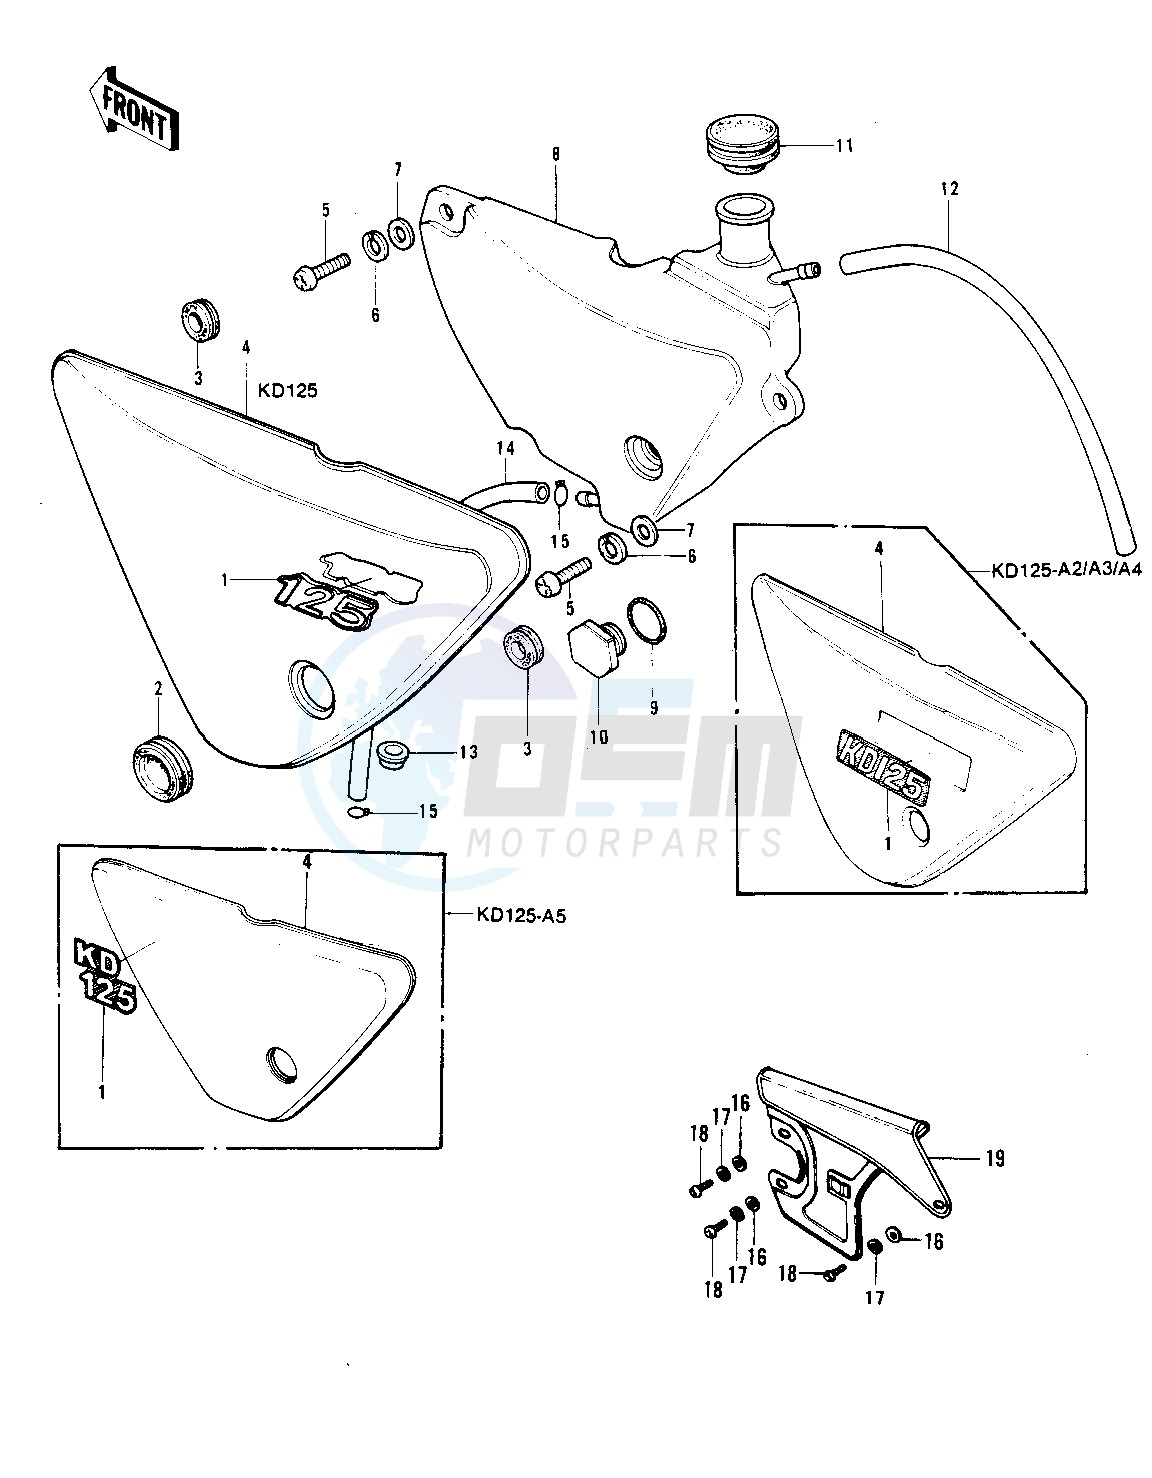 SIDE COVER_OIL TANK_CHAIN COVER blueprint